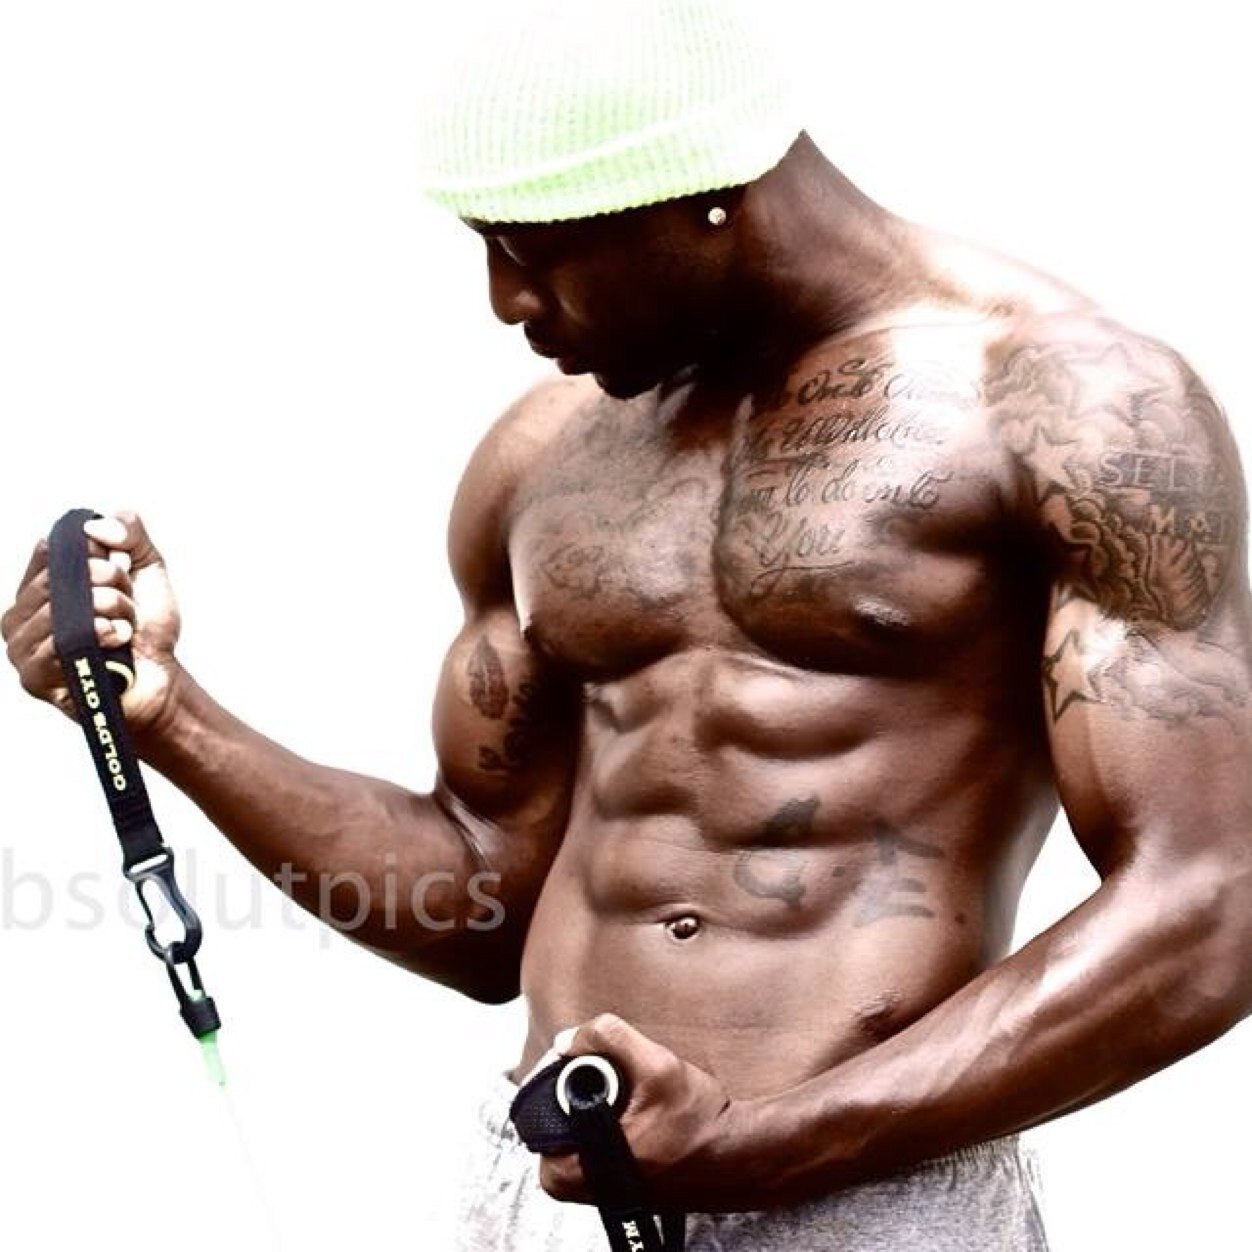 Fitness isn't a hobby its a lifestyle! Instructor / Personal Trainer